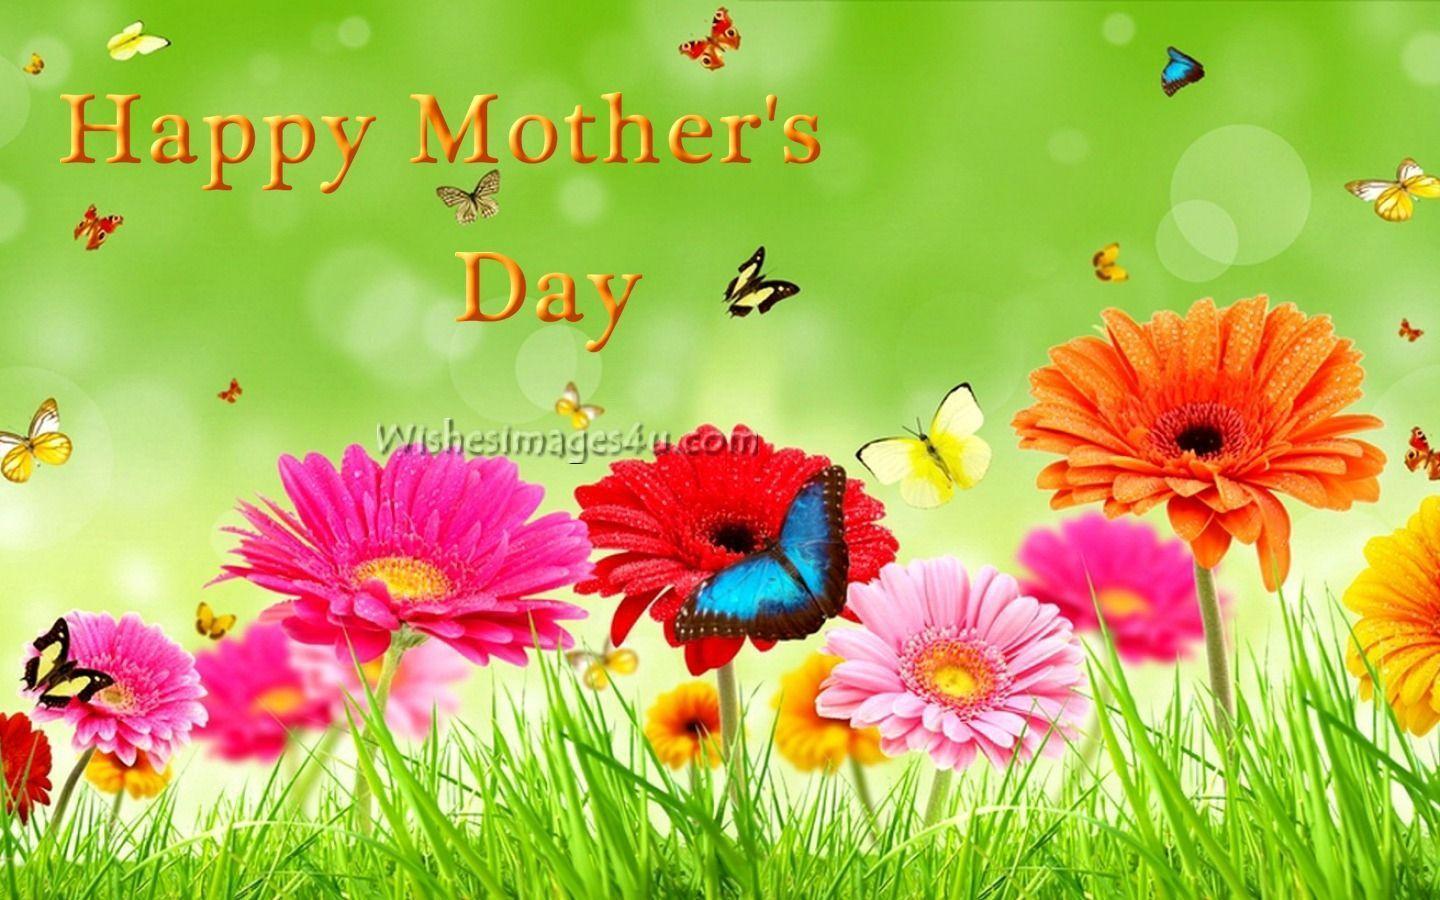 Happy Mothers Day 2017 Flowers Image. Mothers Day 2017 HD